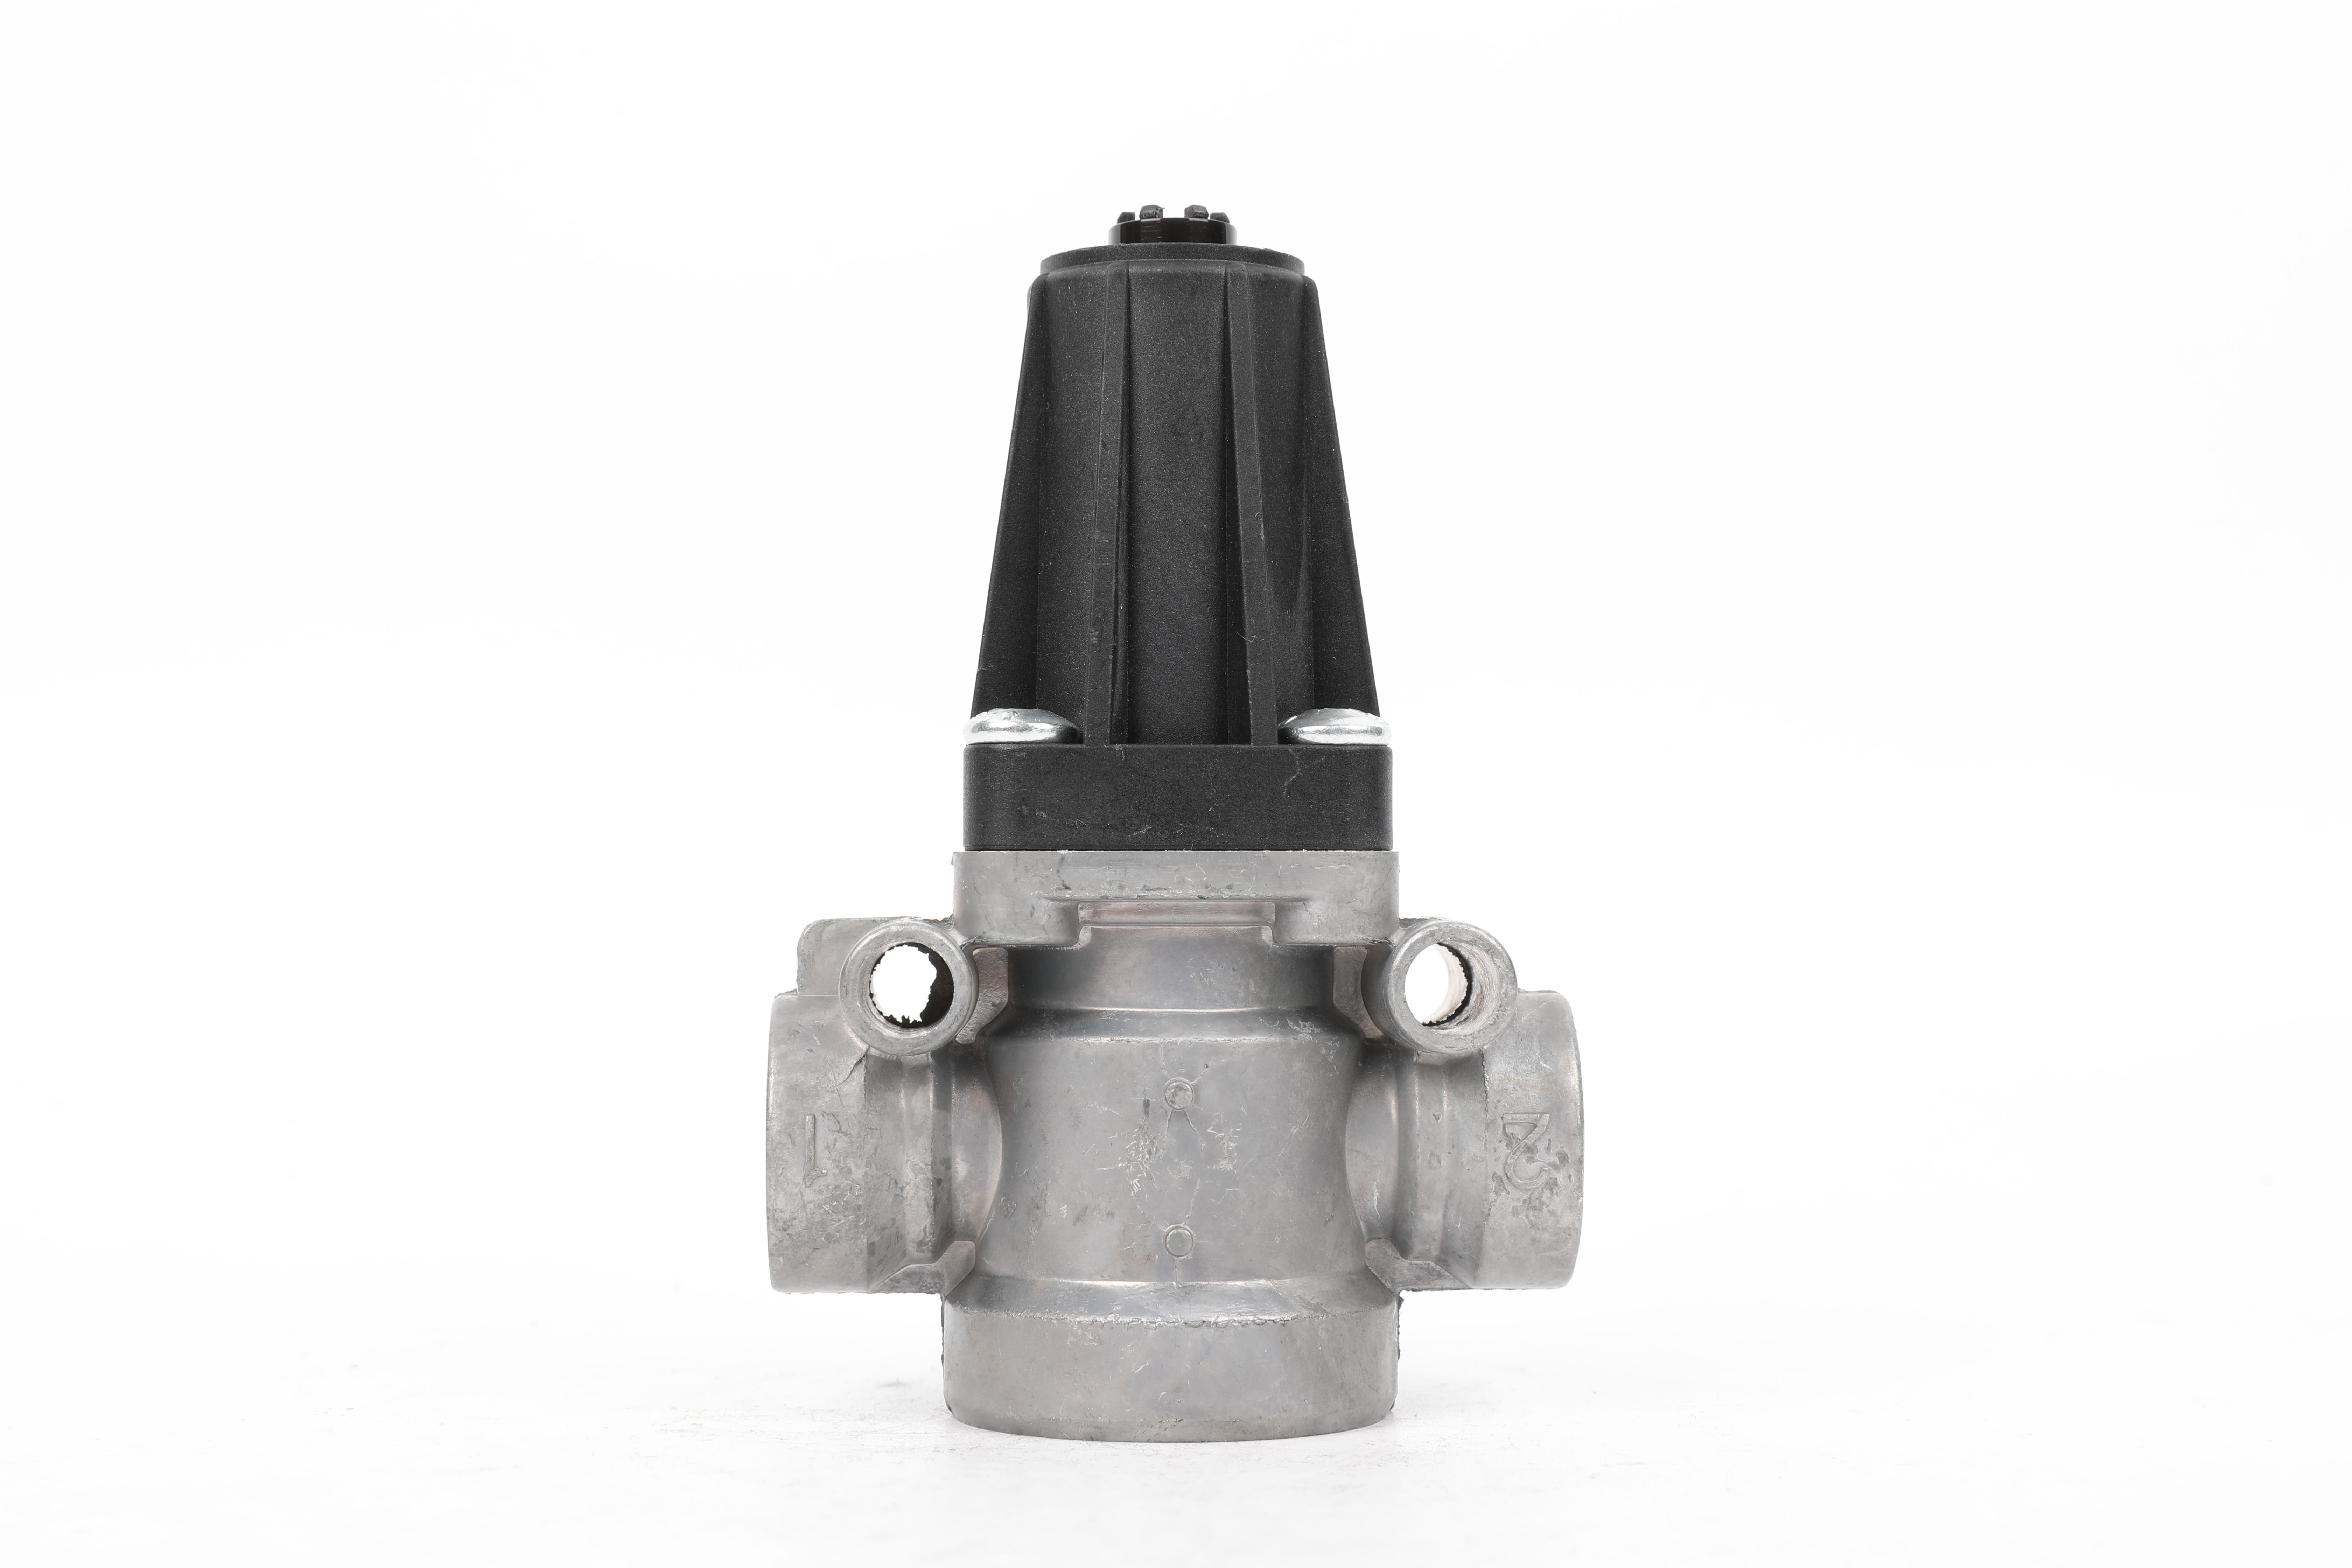 In automobile braking systems, the specific application of Pressure Limiting Valve